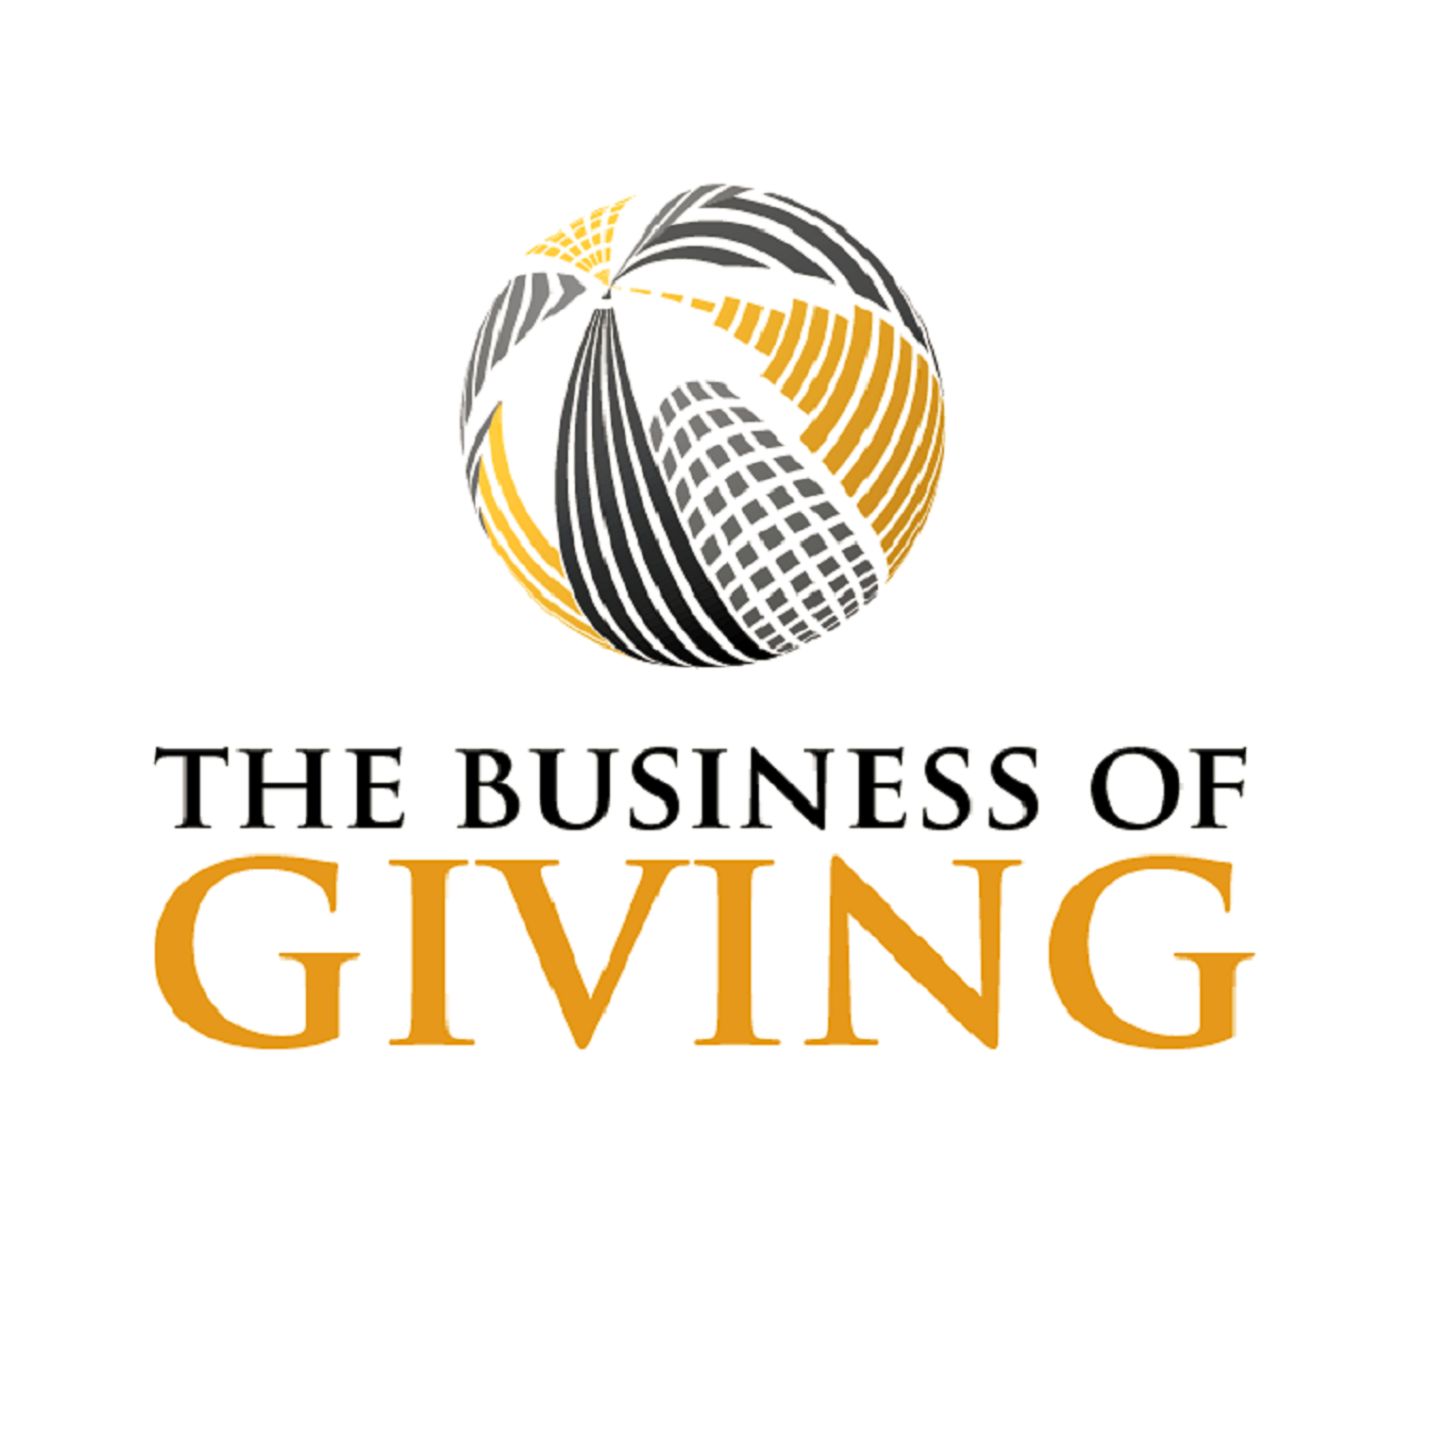 The Business of Giving 5-5-19